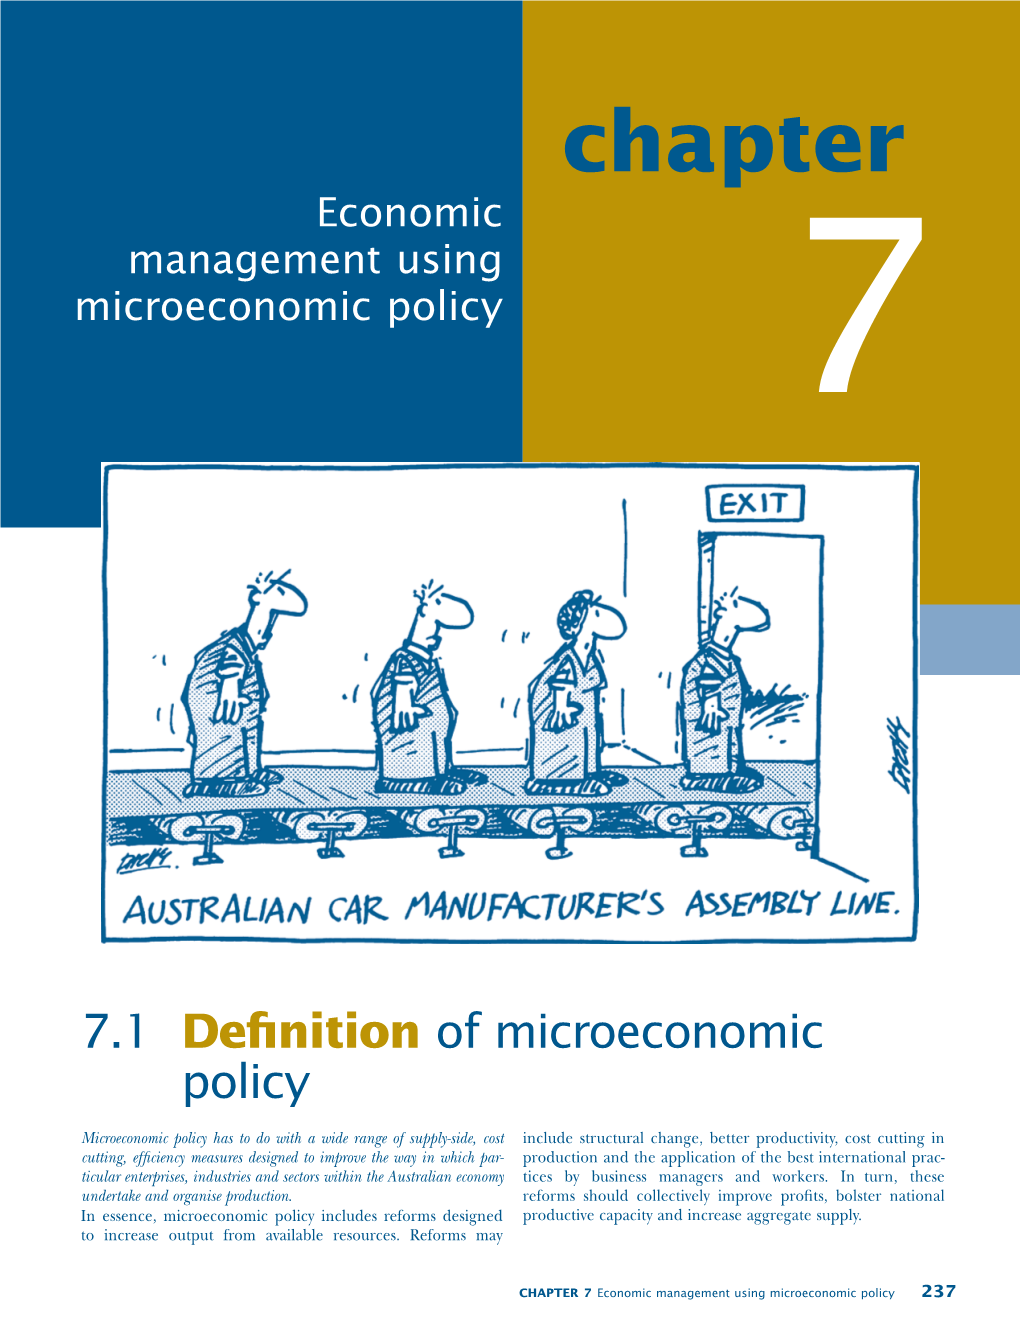 CHAPTER 7 Economic Management Using Microeconomic Policy 237 7.2 Aims of Microeconomic Policy